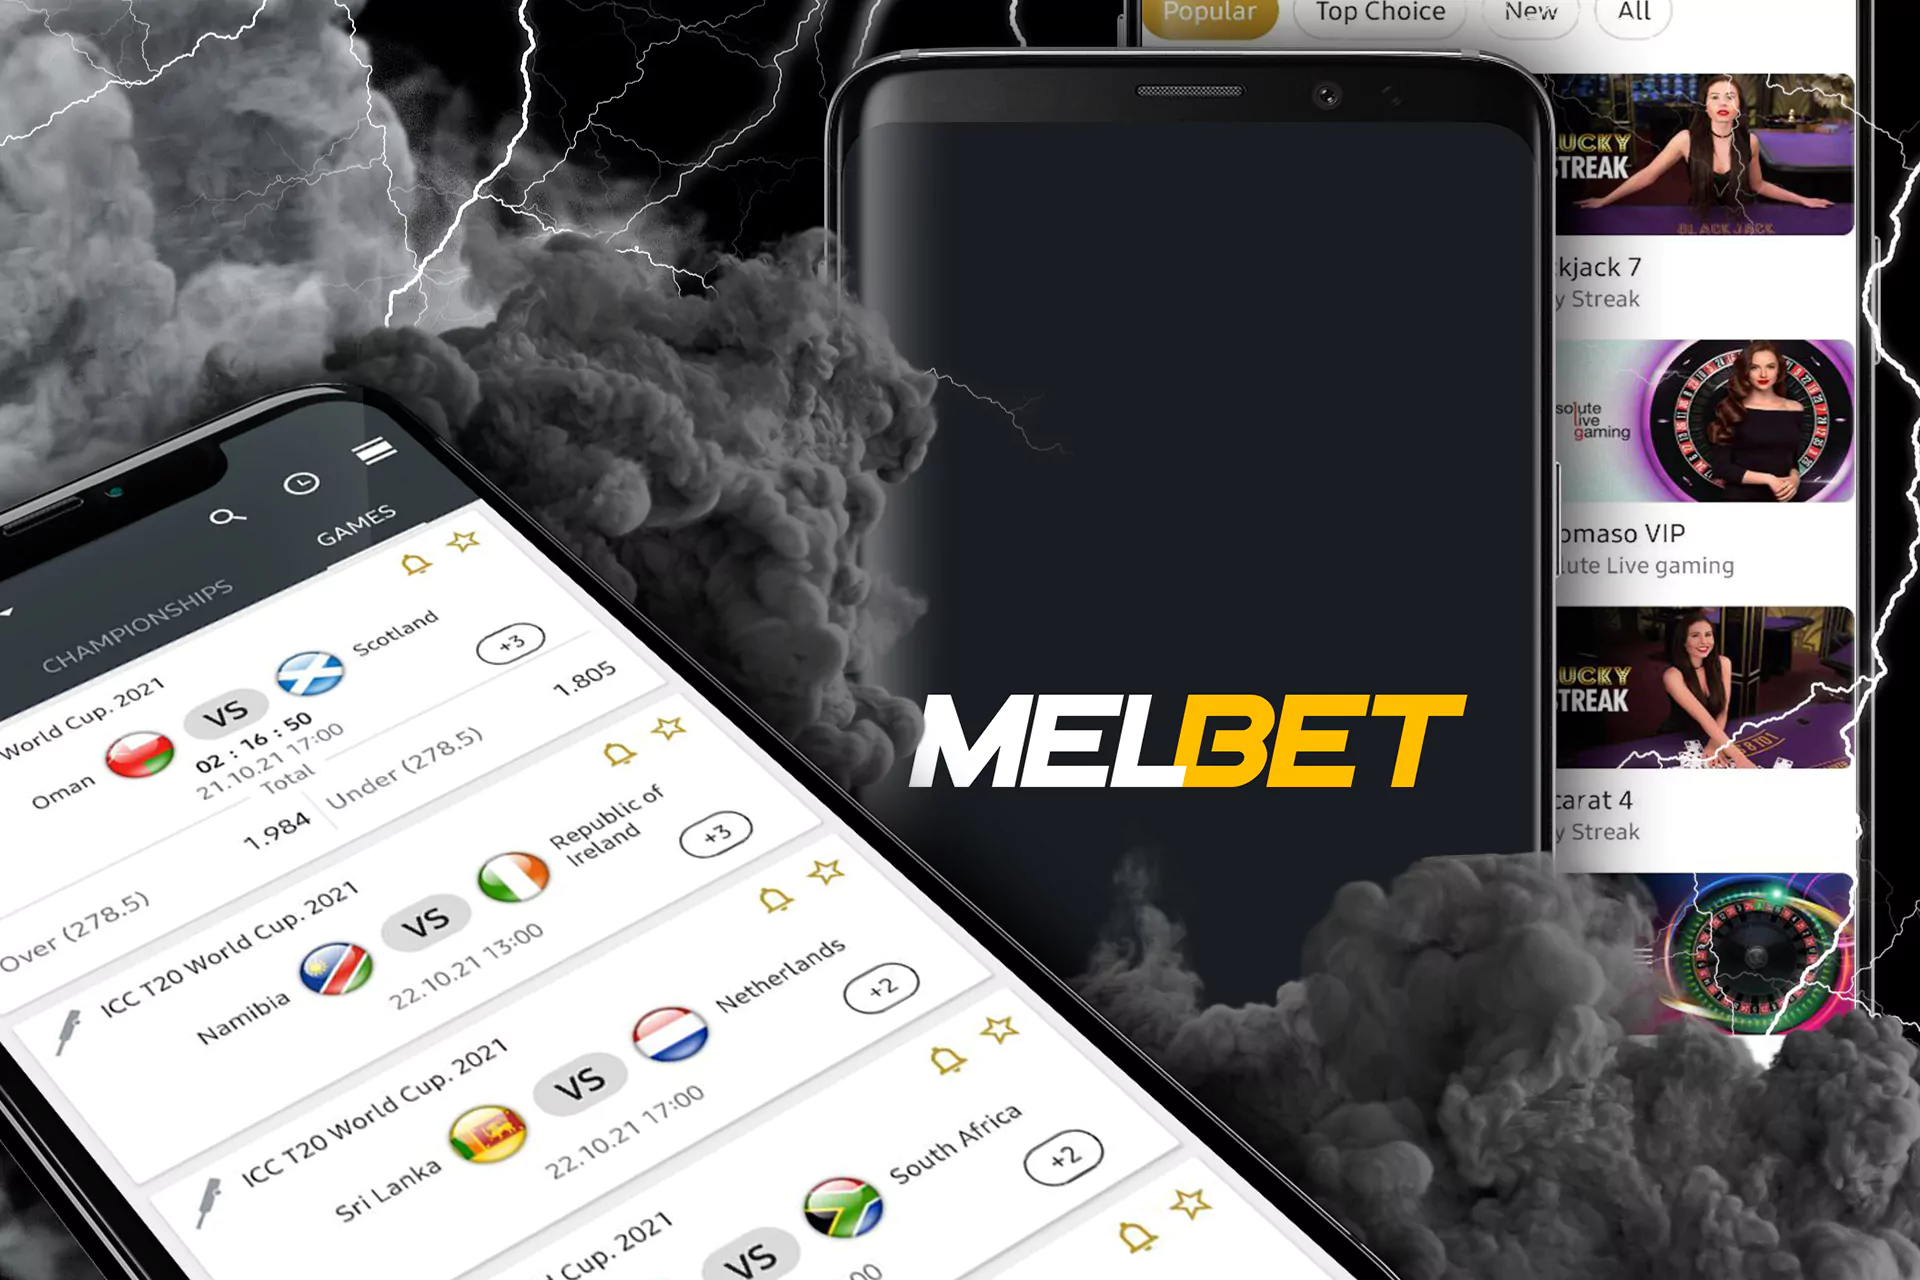 The Melbet team created an incredible app for Android and iOS devices with special features that make the betting process more exciting.